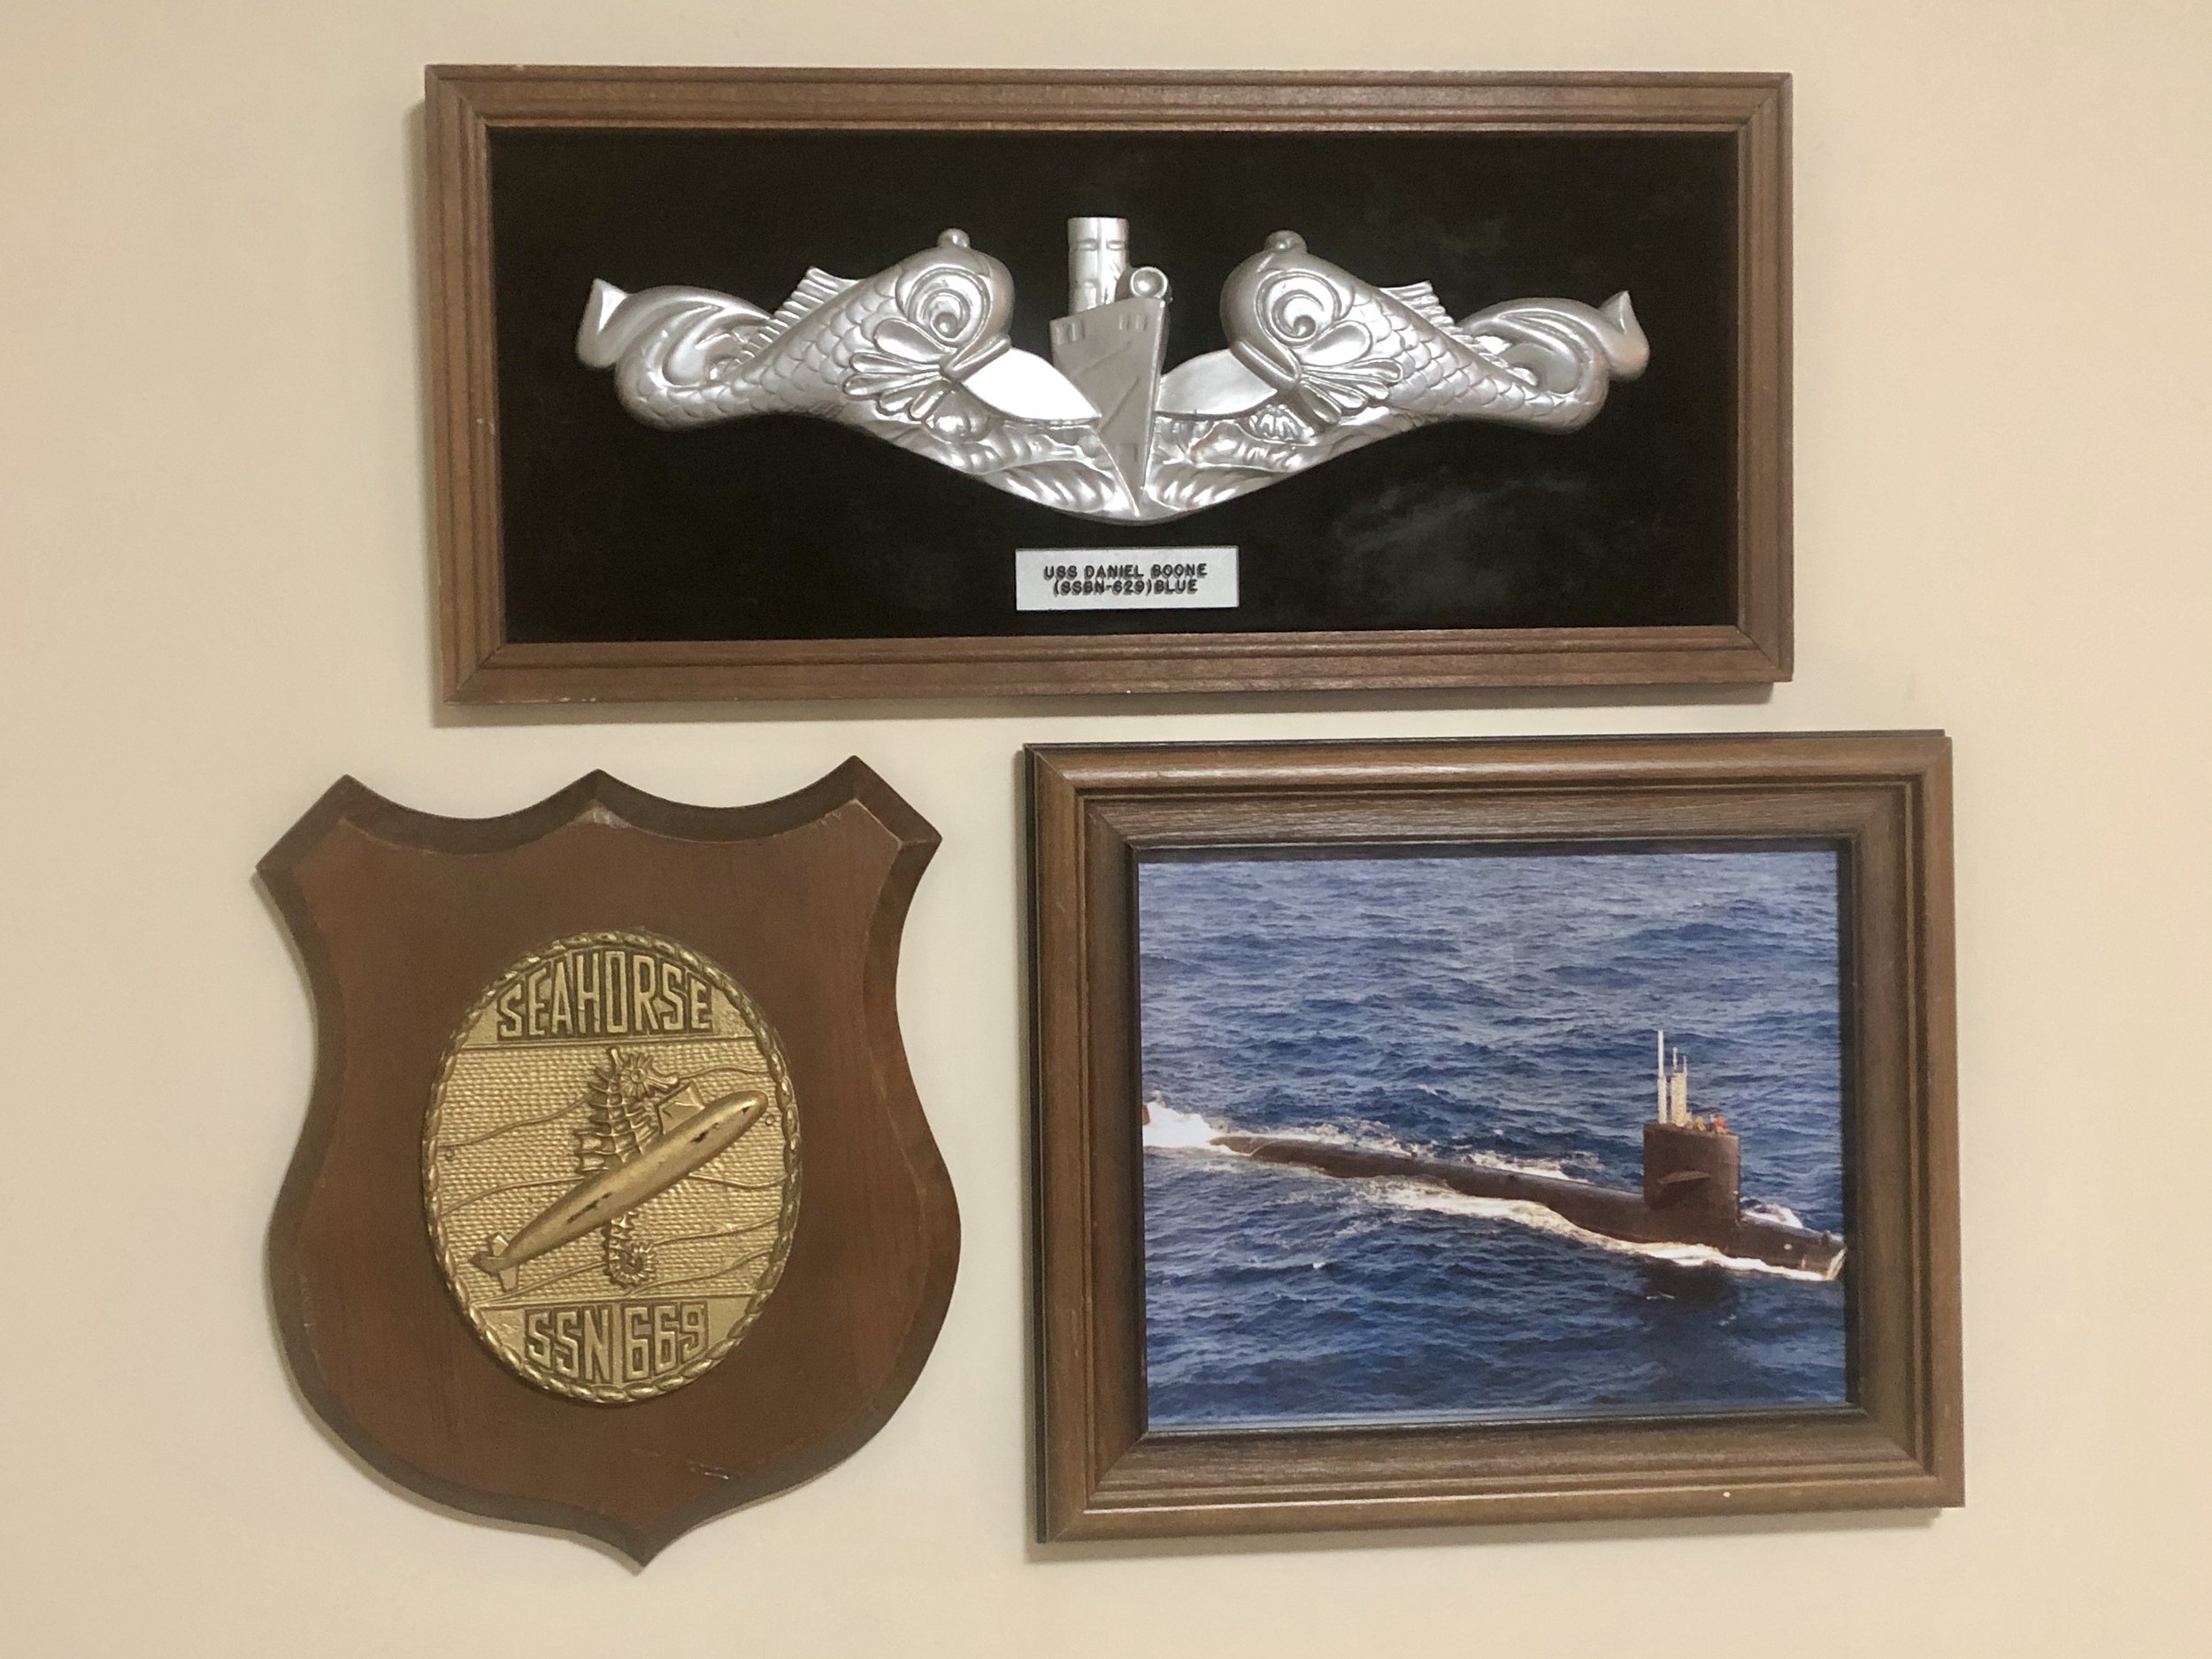  USS Seahorse recognition. 